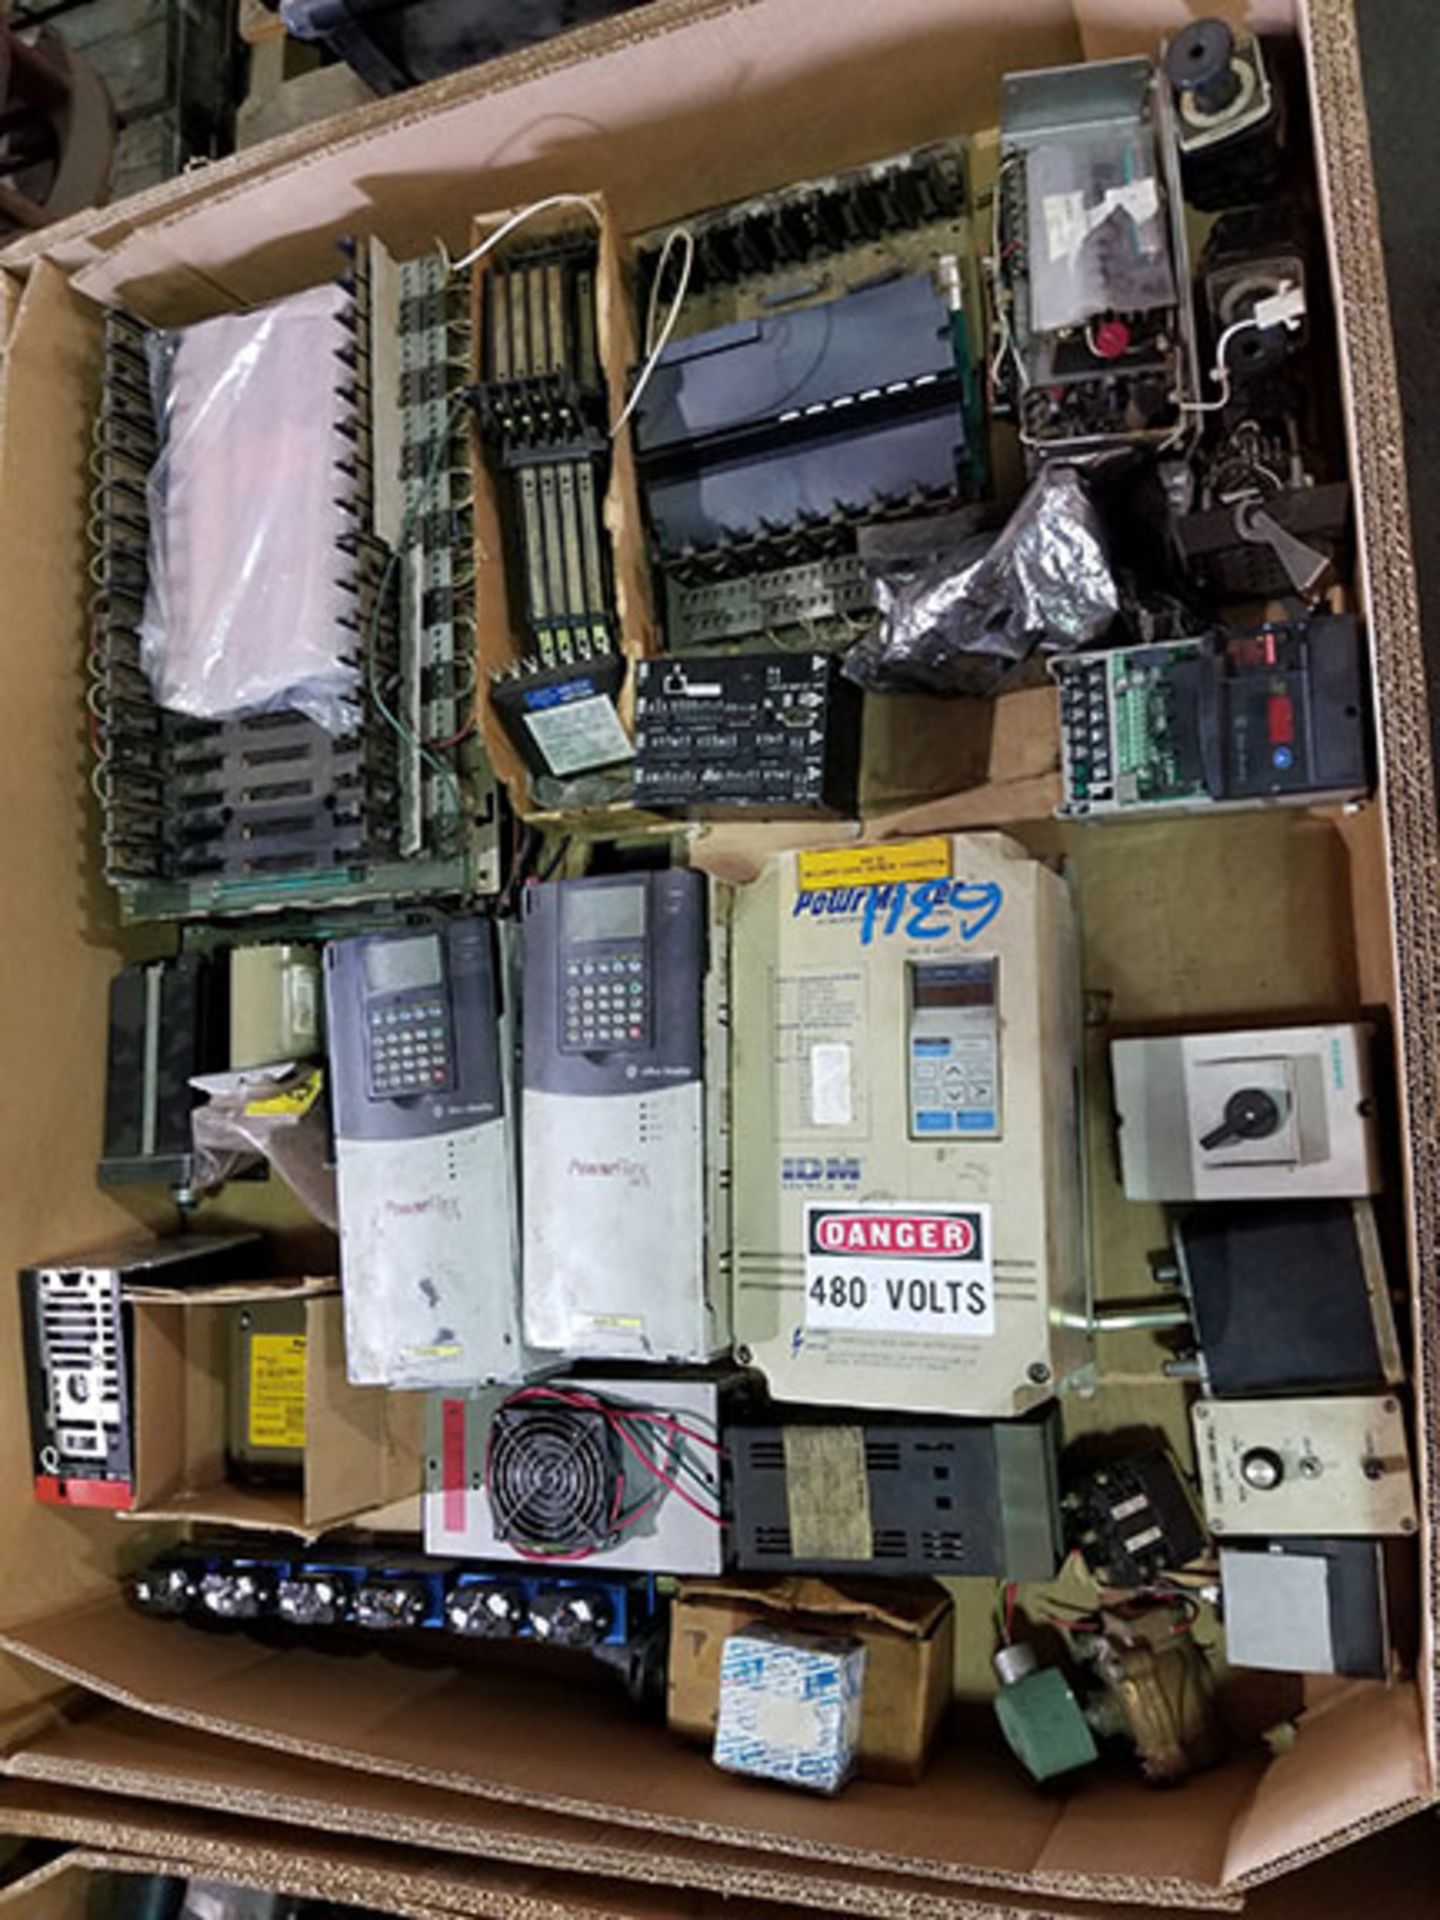 PALLET OF (2) AB POWERFLEX 700 VFD, AC MOTOR CONTROL, AND ASSORTED CONTROL ITEMS